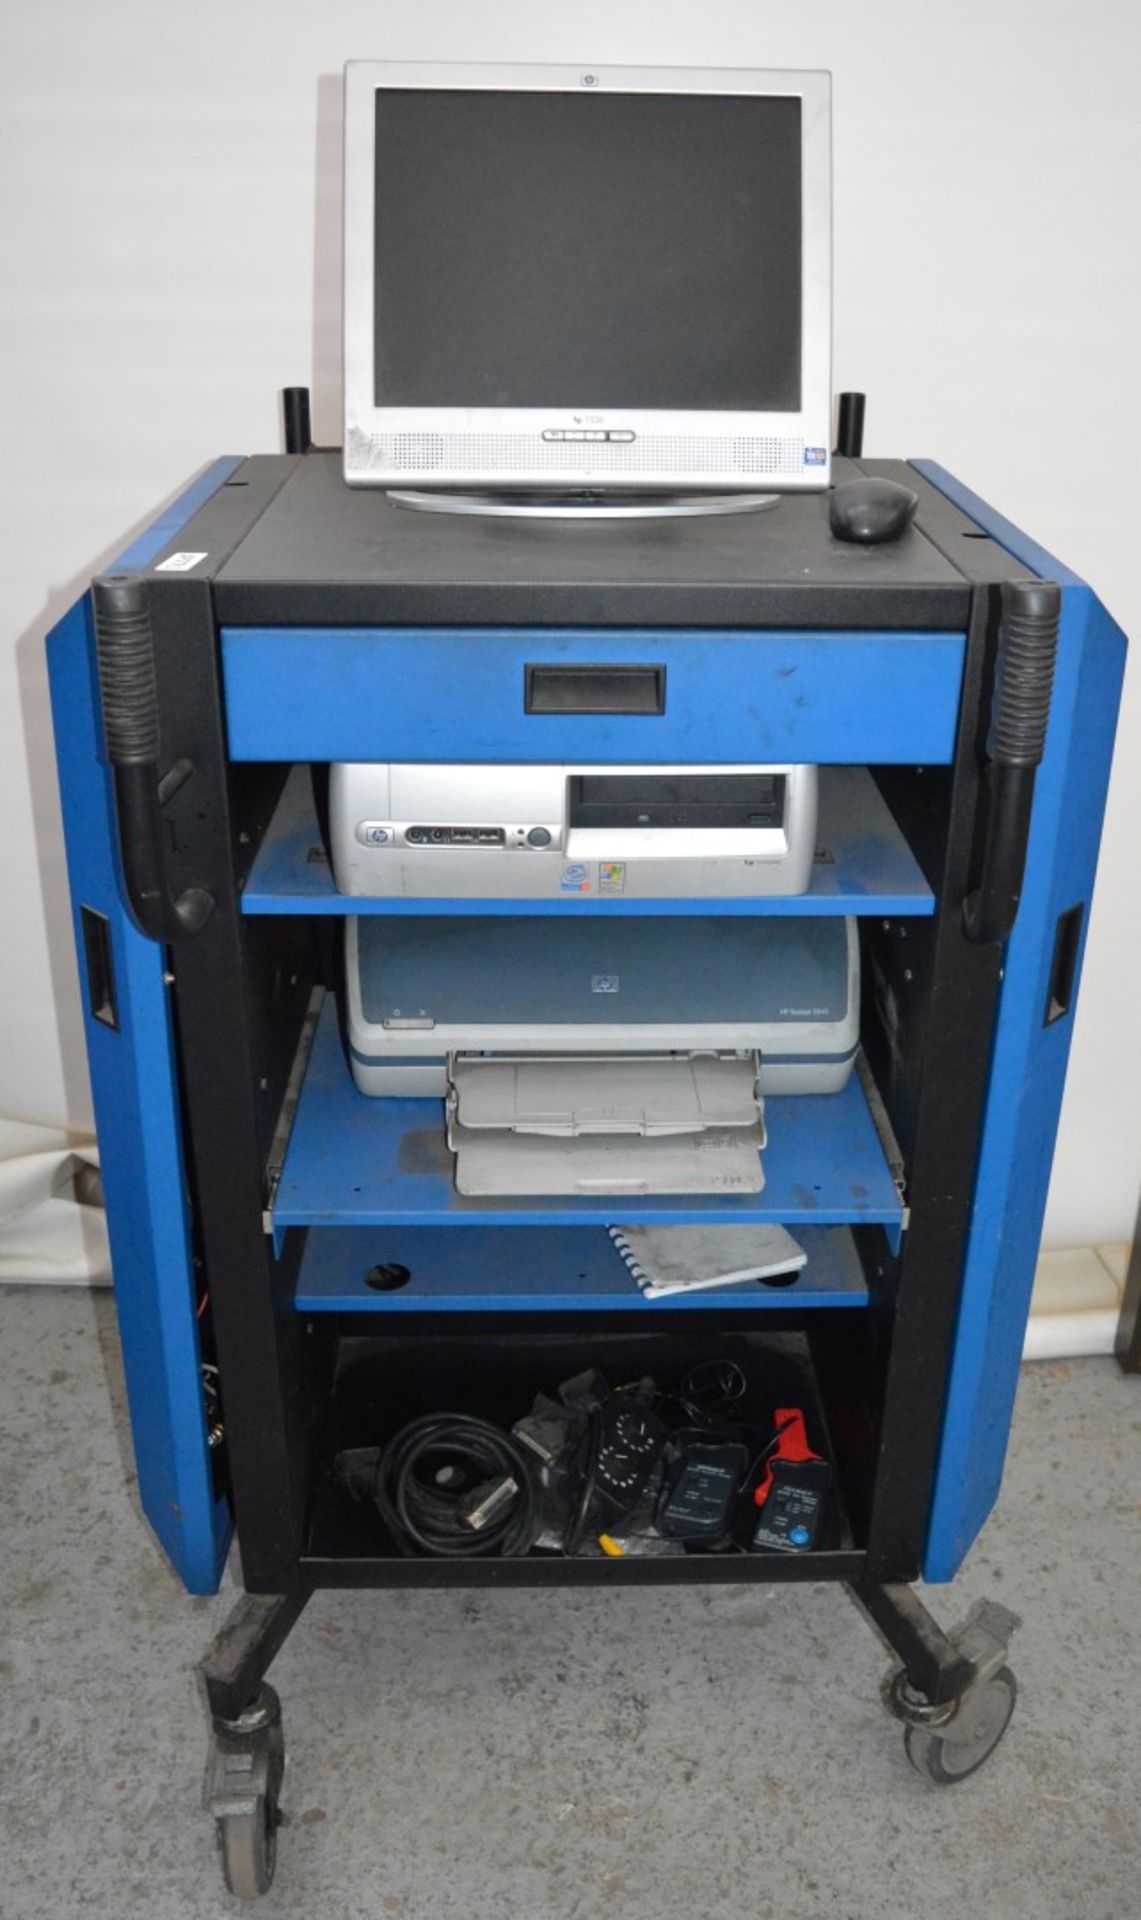 1 x Omitec OmiTechCenter Automotive Diagnostic Workstation - Please View The Pictures Provided -